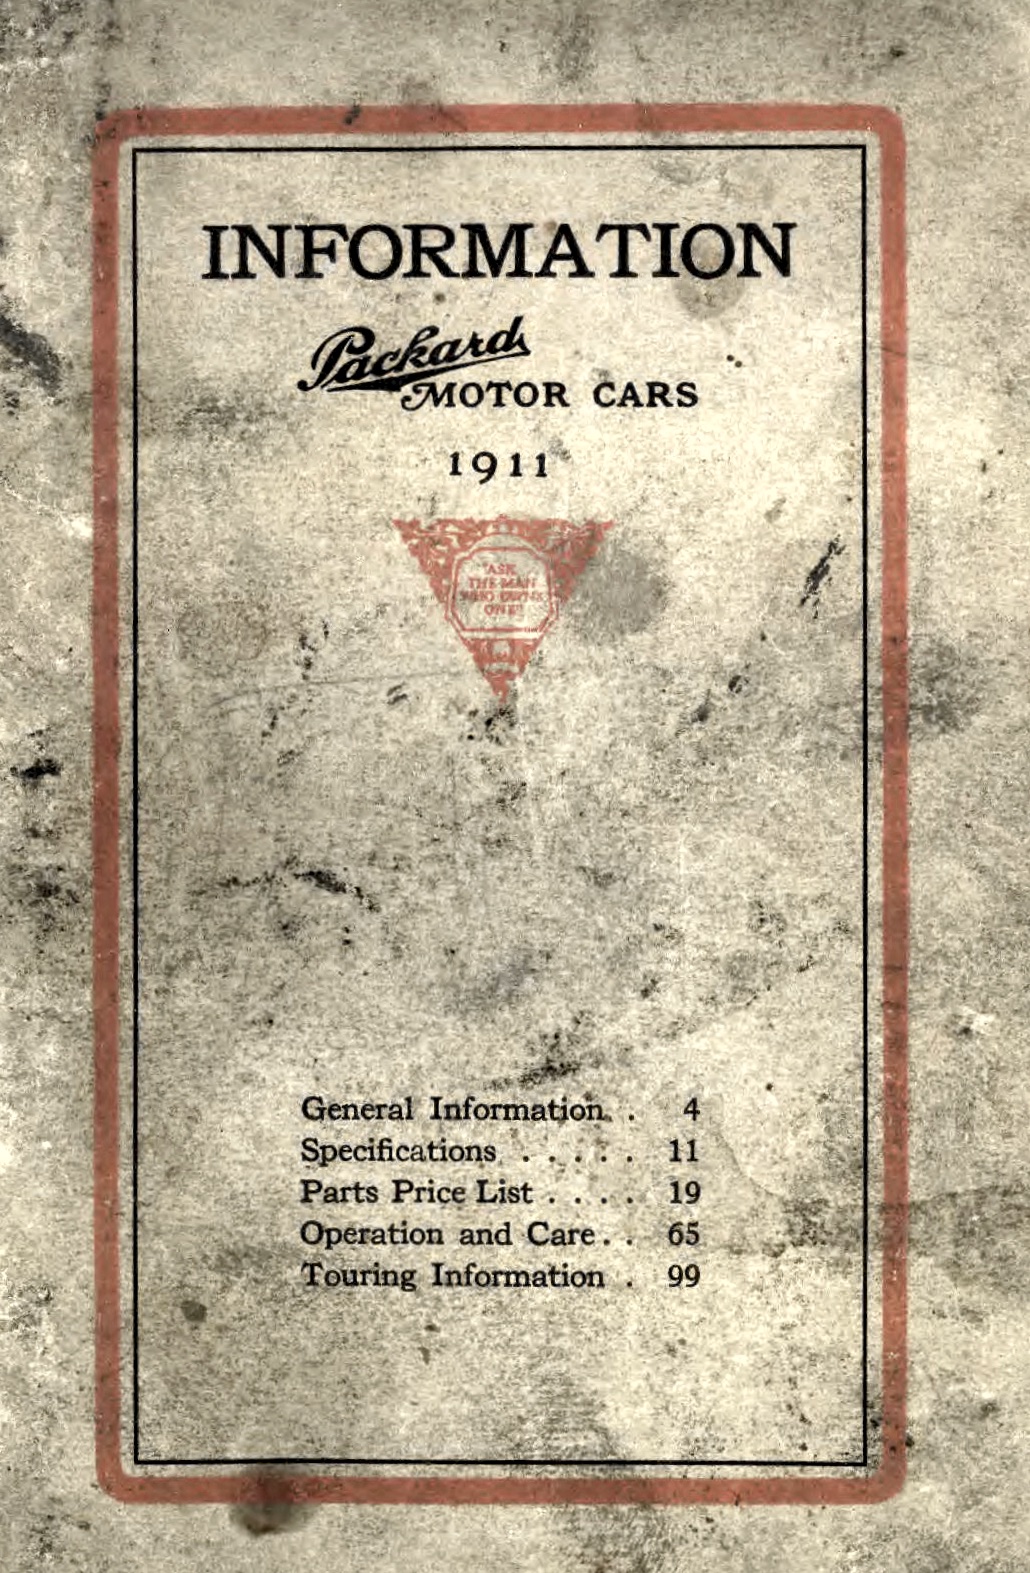 1911 Packard Owners Manual